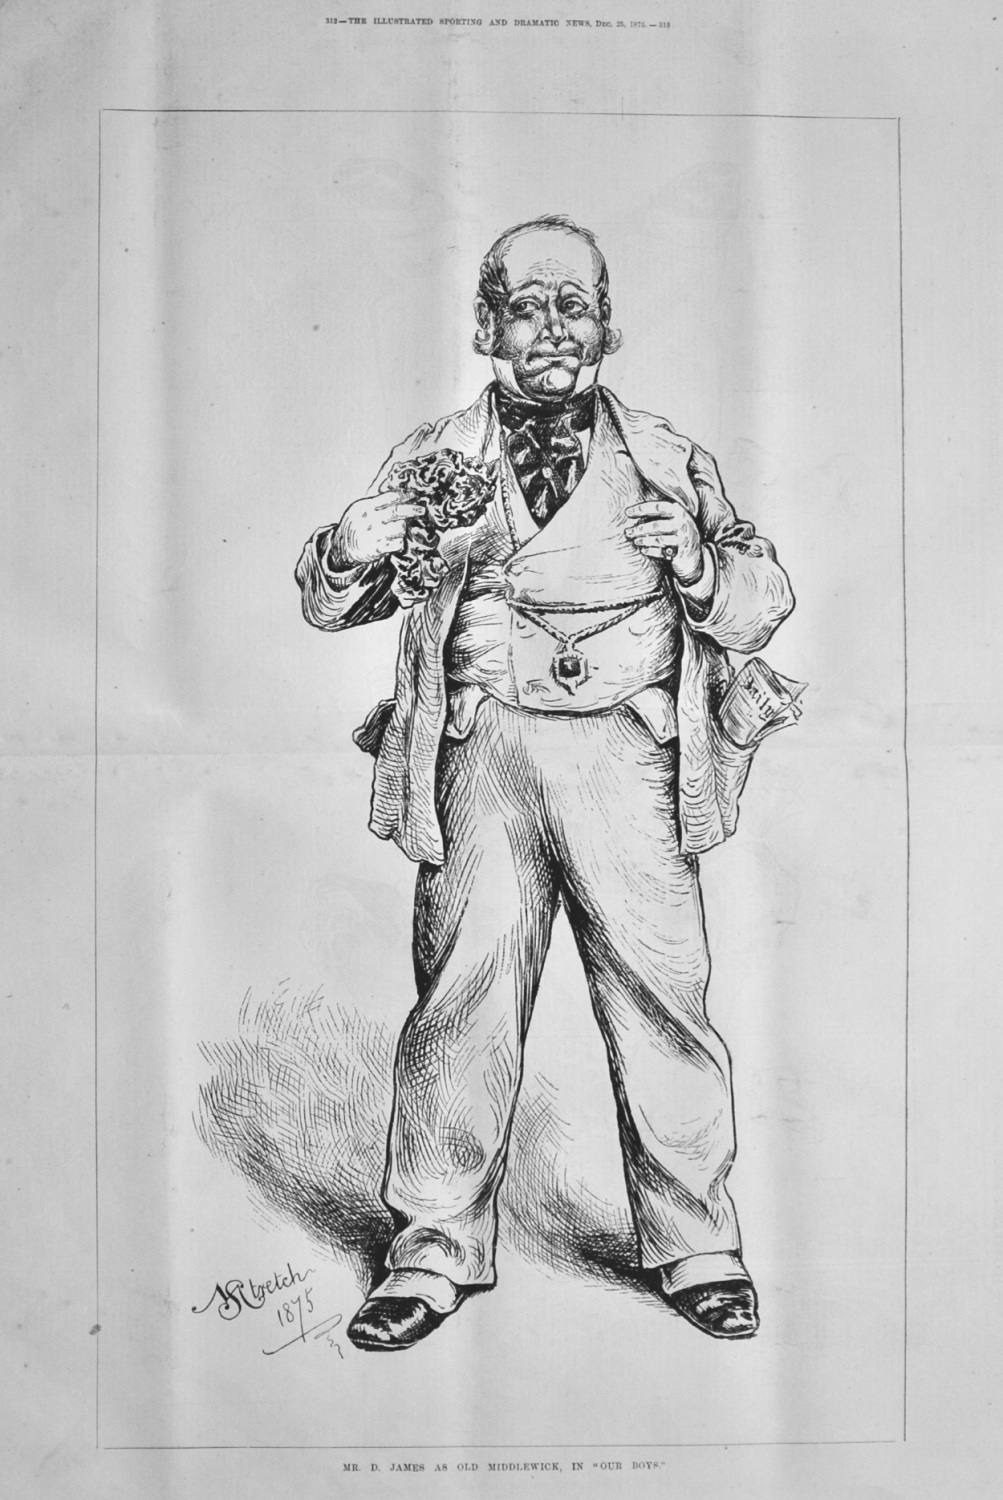 Mr. D. James as Old MIddlewick, in 